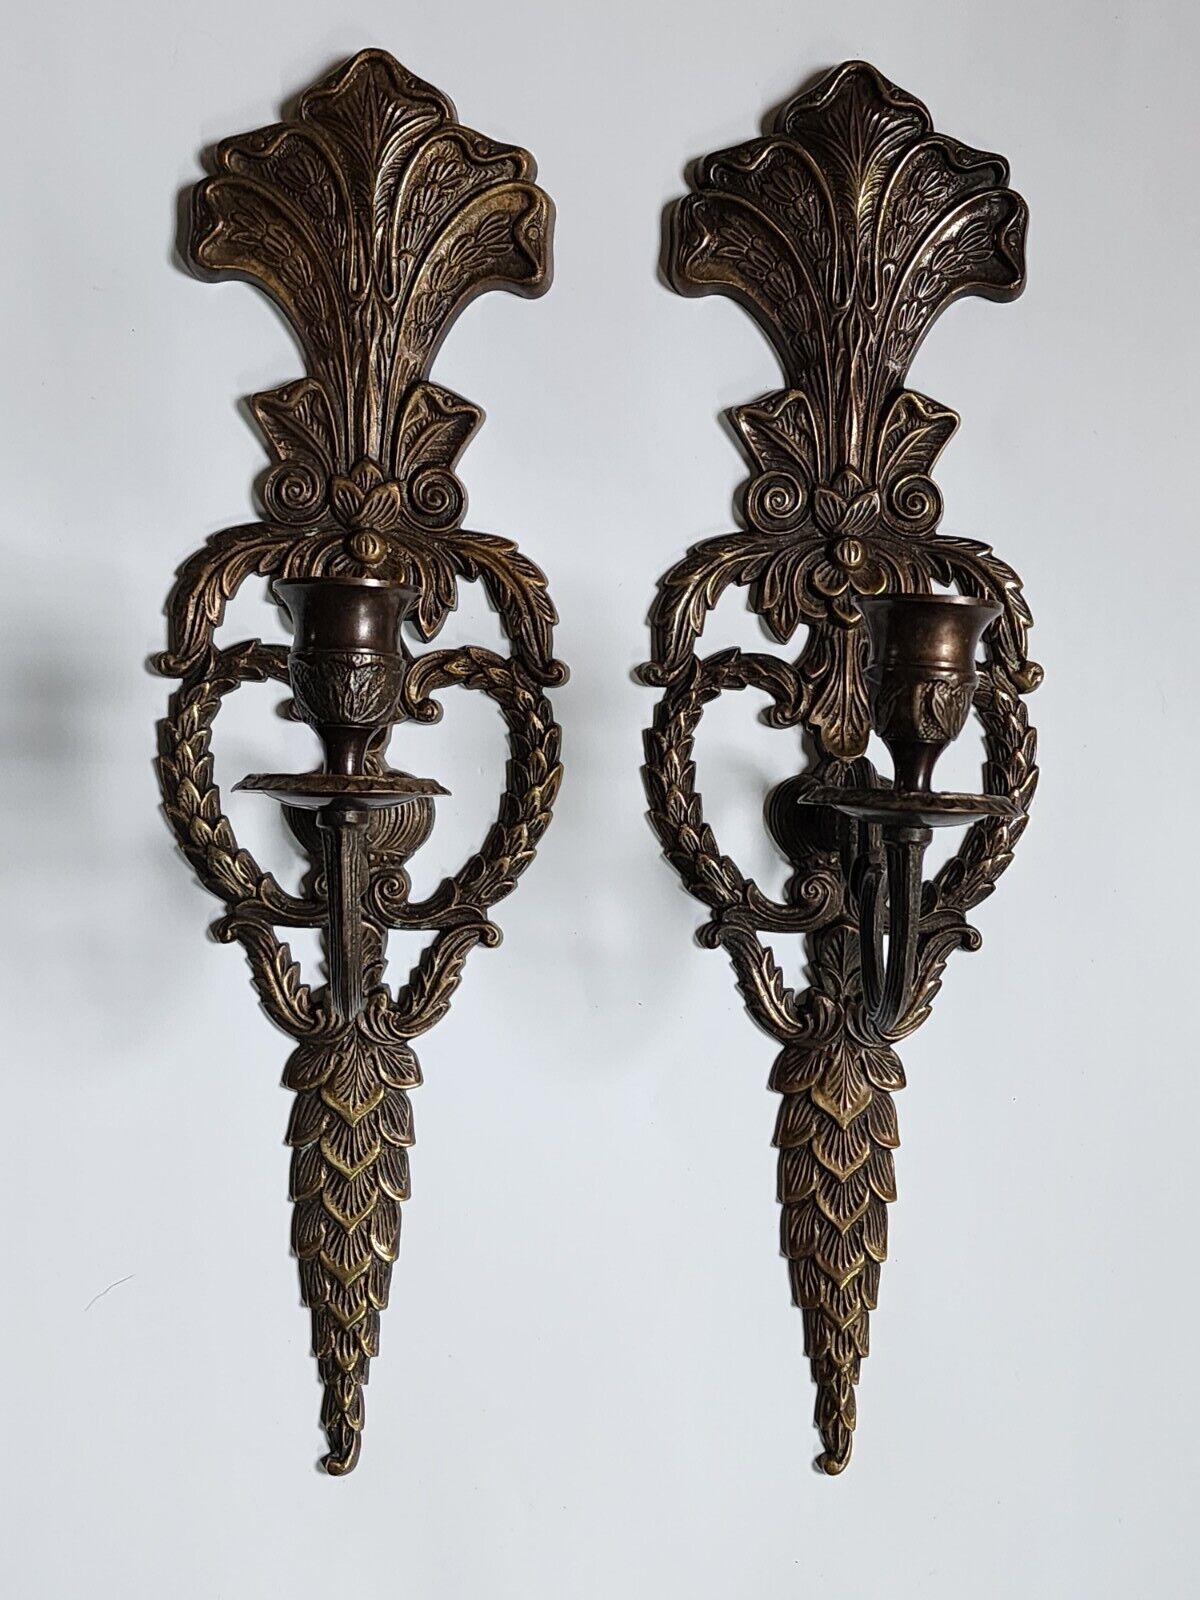 2-Vintage Solid Brass Candle Sconce Wall Hanging Decor Art 17